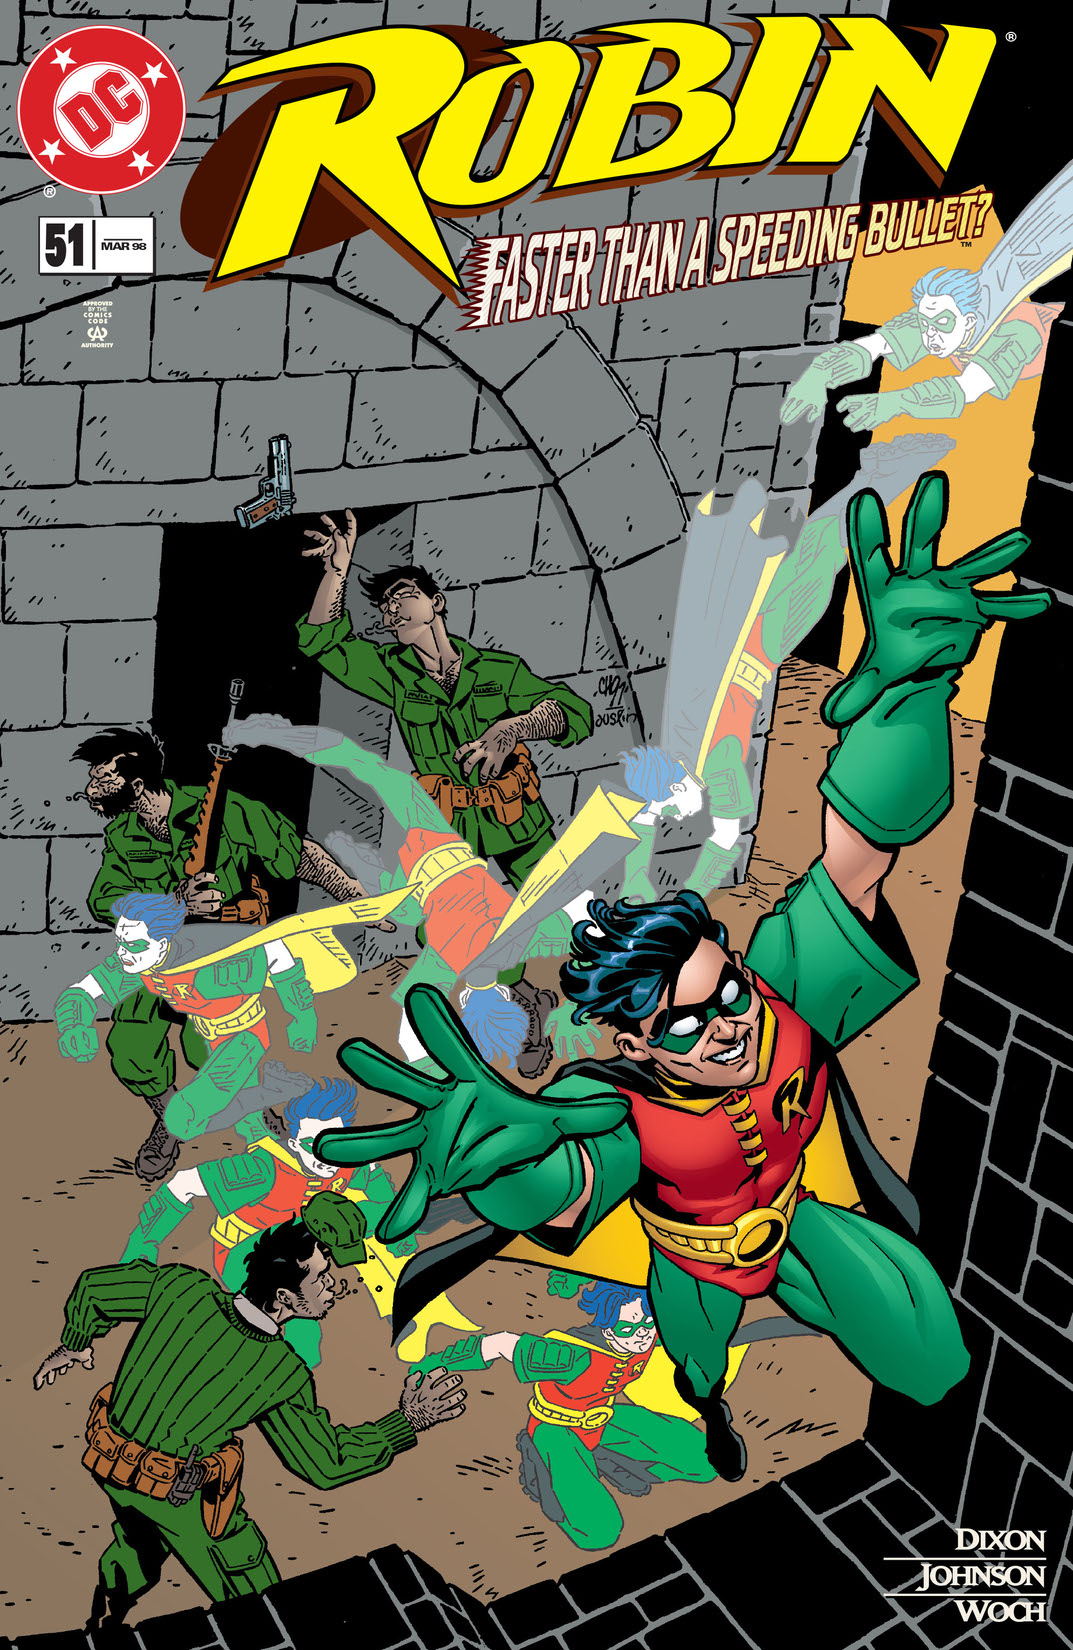 Robin (1993-) #51 preview images